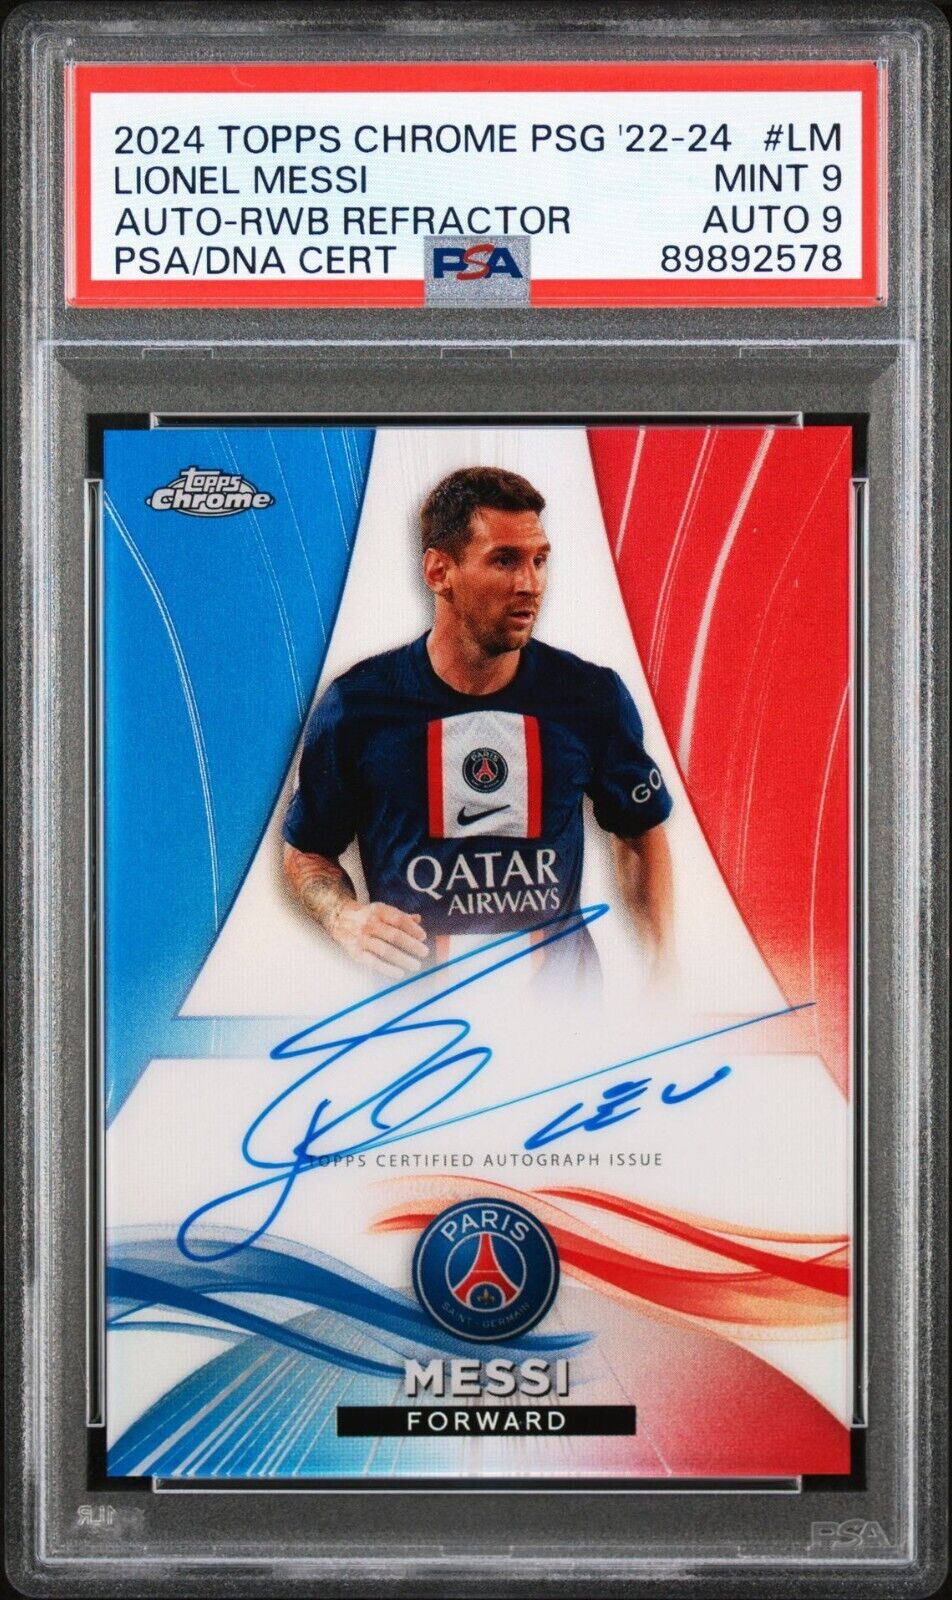 2022-24 TOPPS CHROME PSG LIONEL MESSI /50 AUTO ON CARD PSA 9 MINT CARD AND AUTO